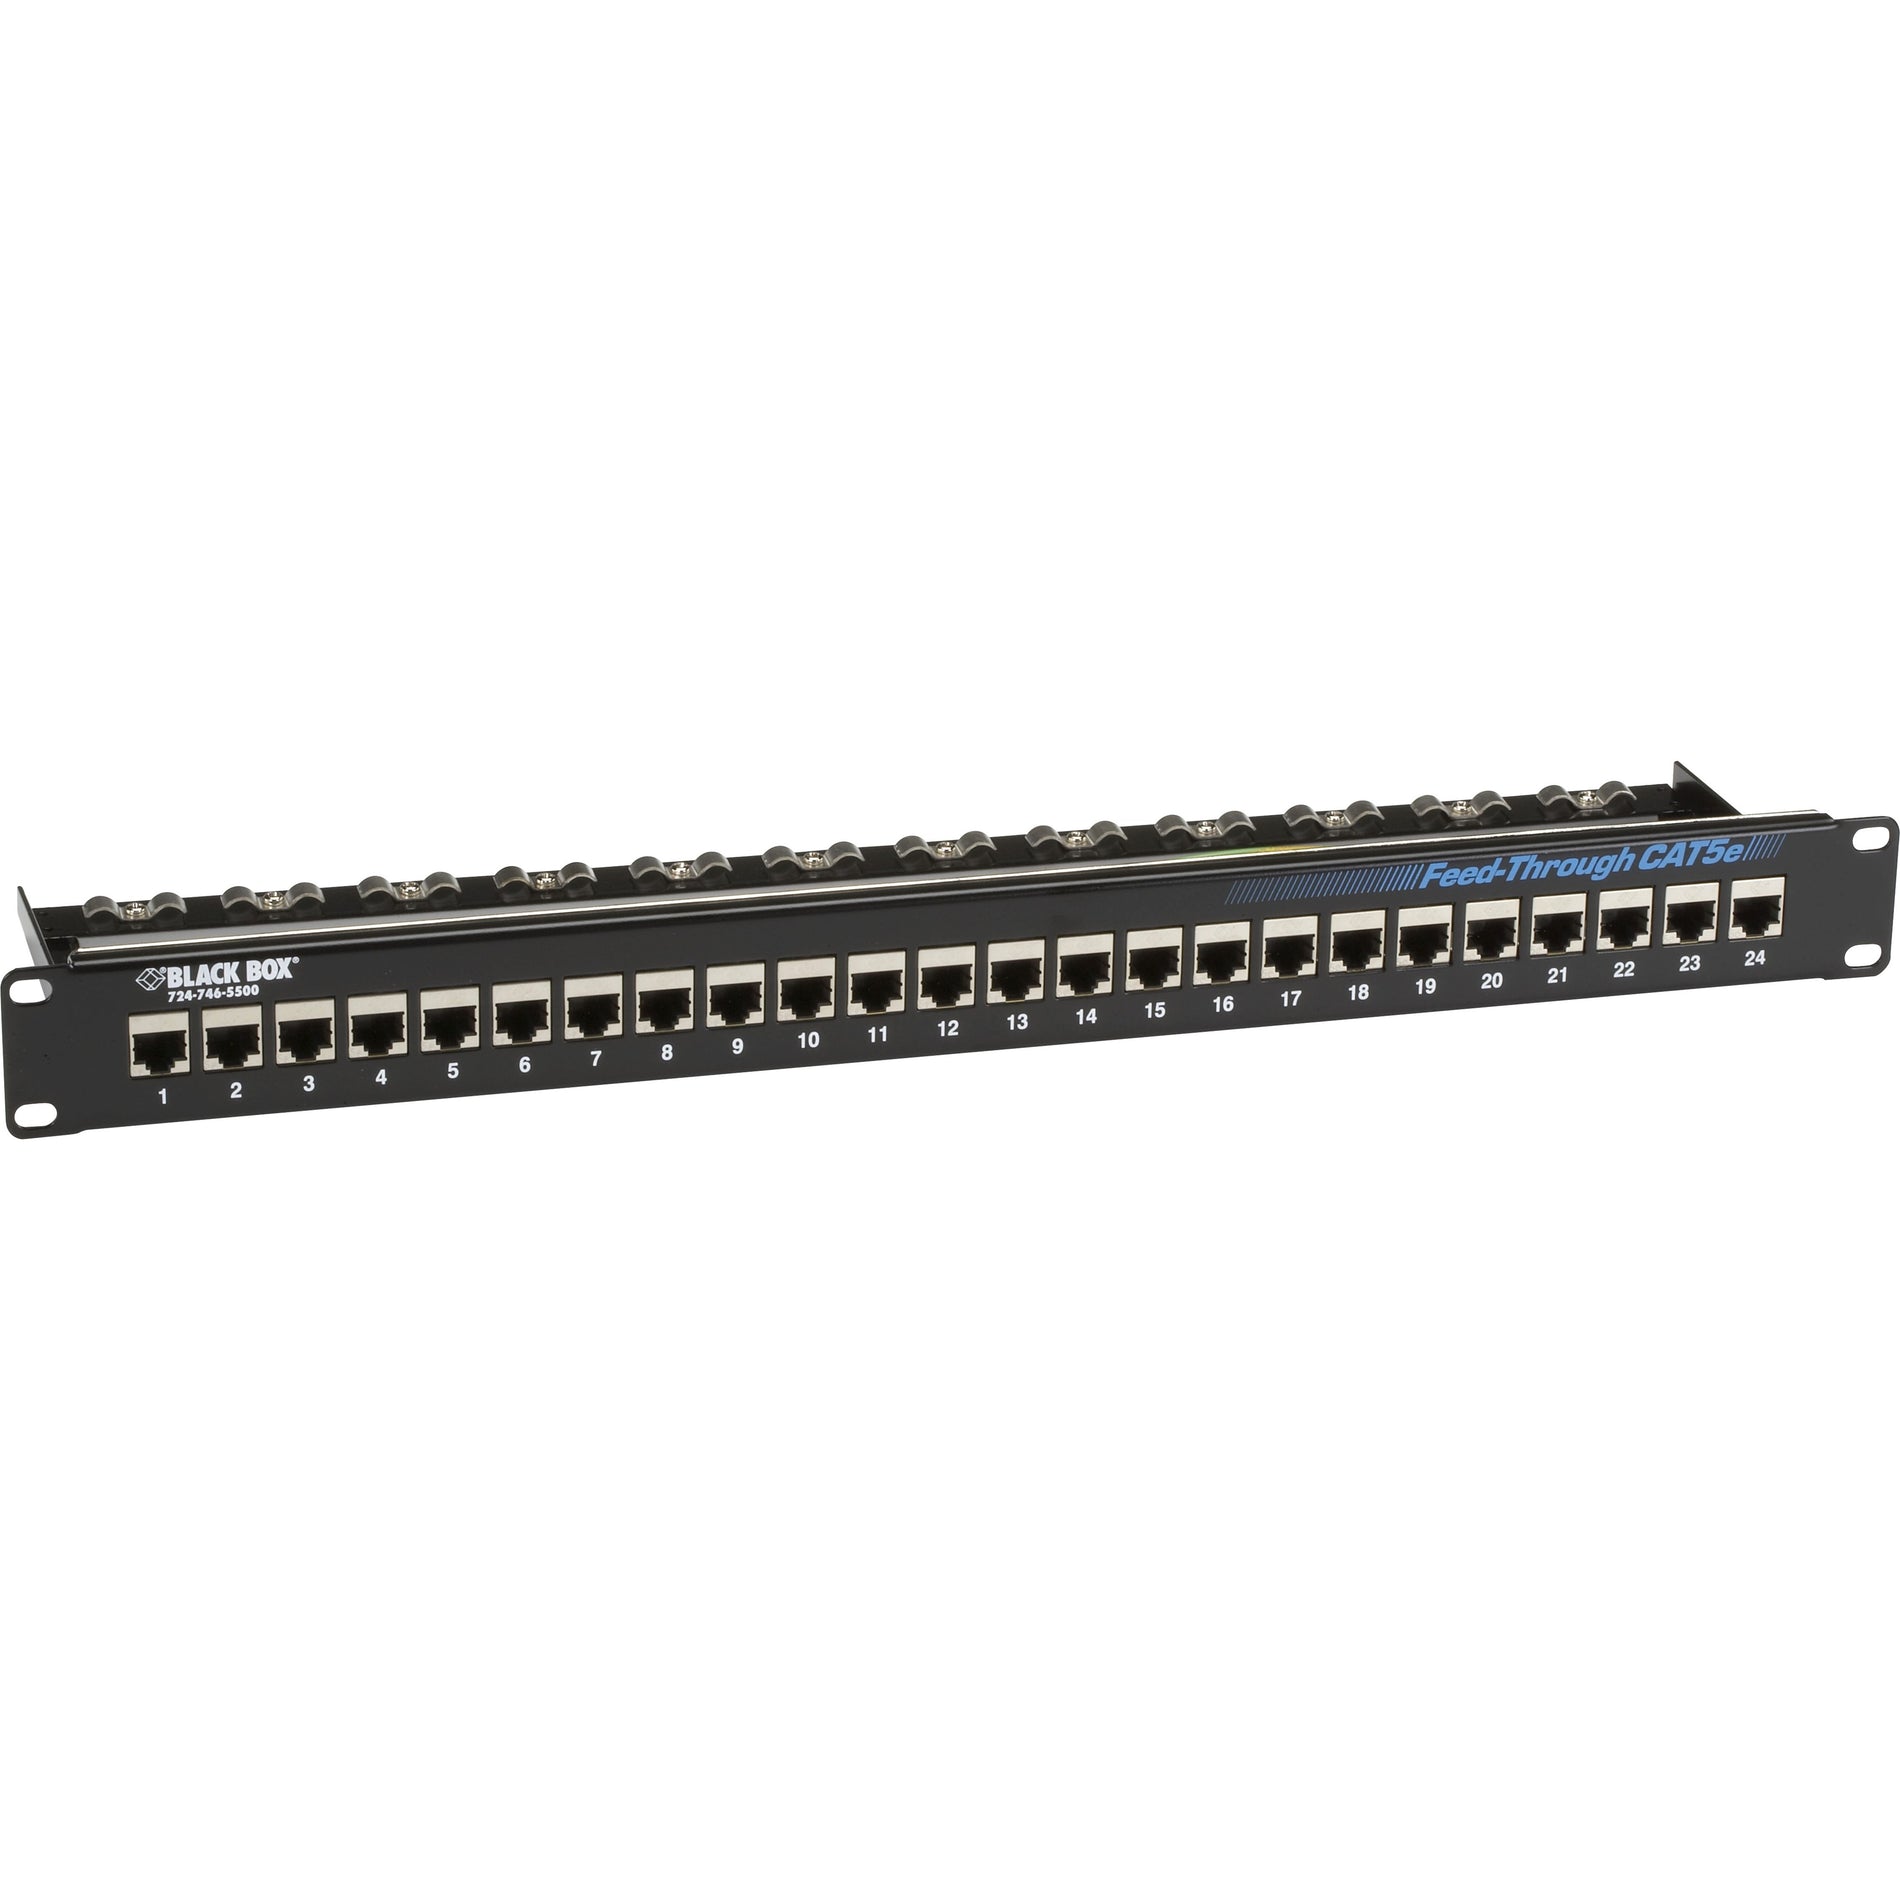 Black Box JPM804A-R2 CAT5e Feed-Through Patch Panel - 1U, Shielded, 24-Port, Easy Cable Management